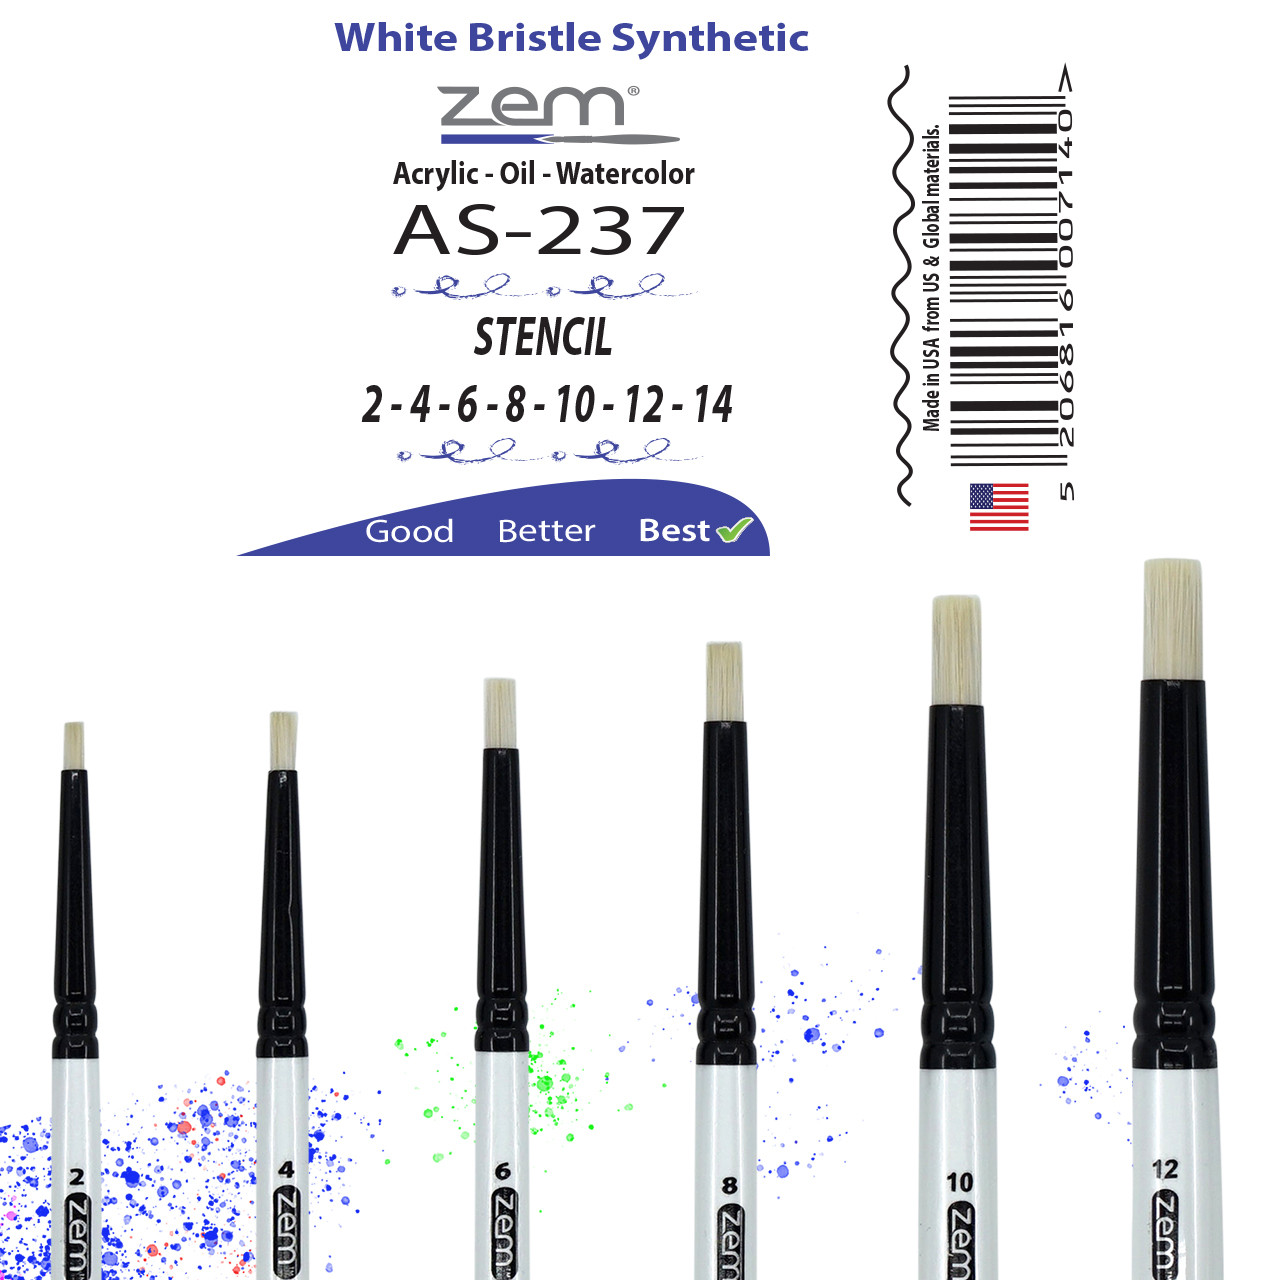 JAGS Stencil Brush With Synthetic Bristle Size 12 - for Any